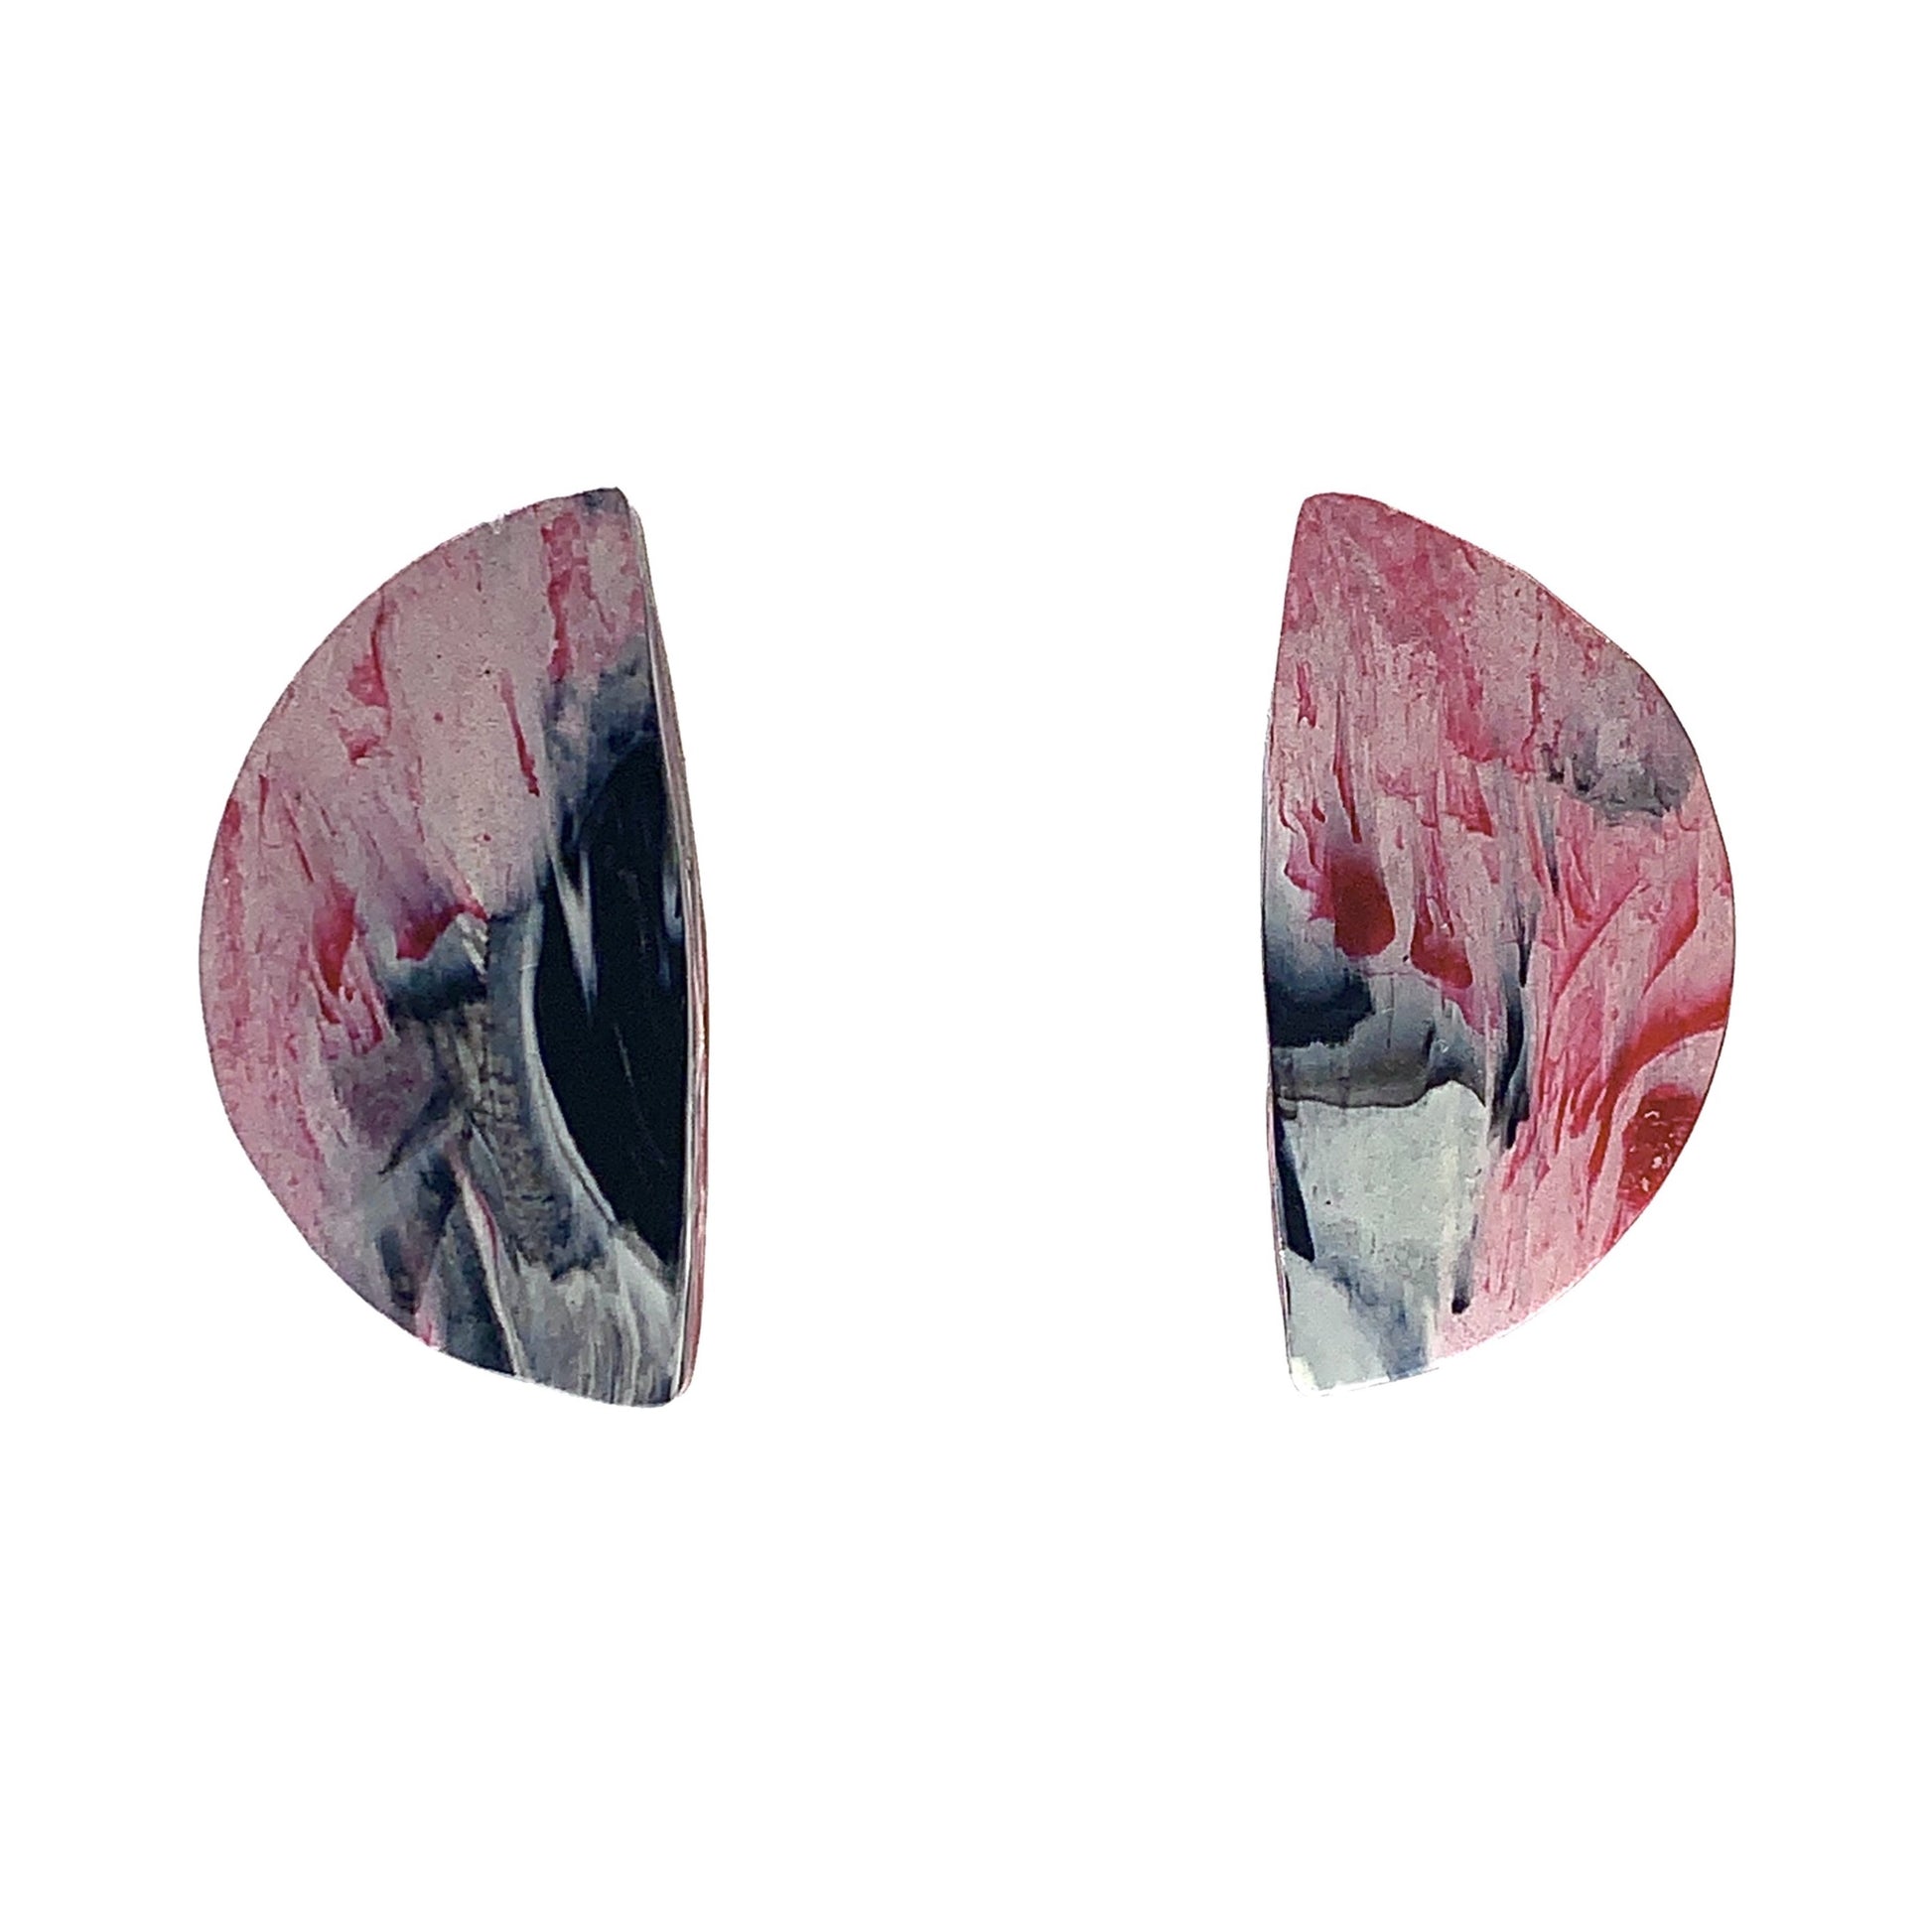 Handmade half moon studs made from recycled plastic